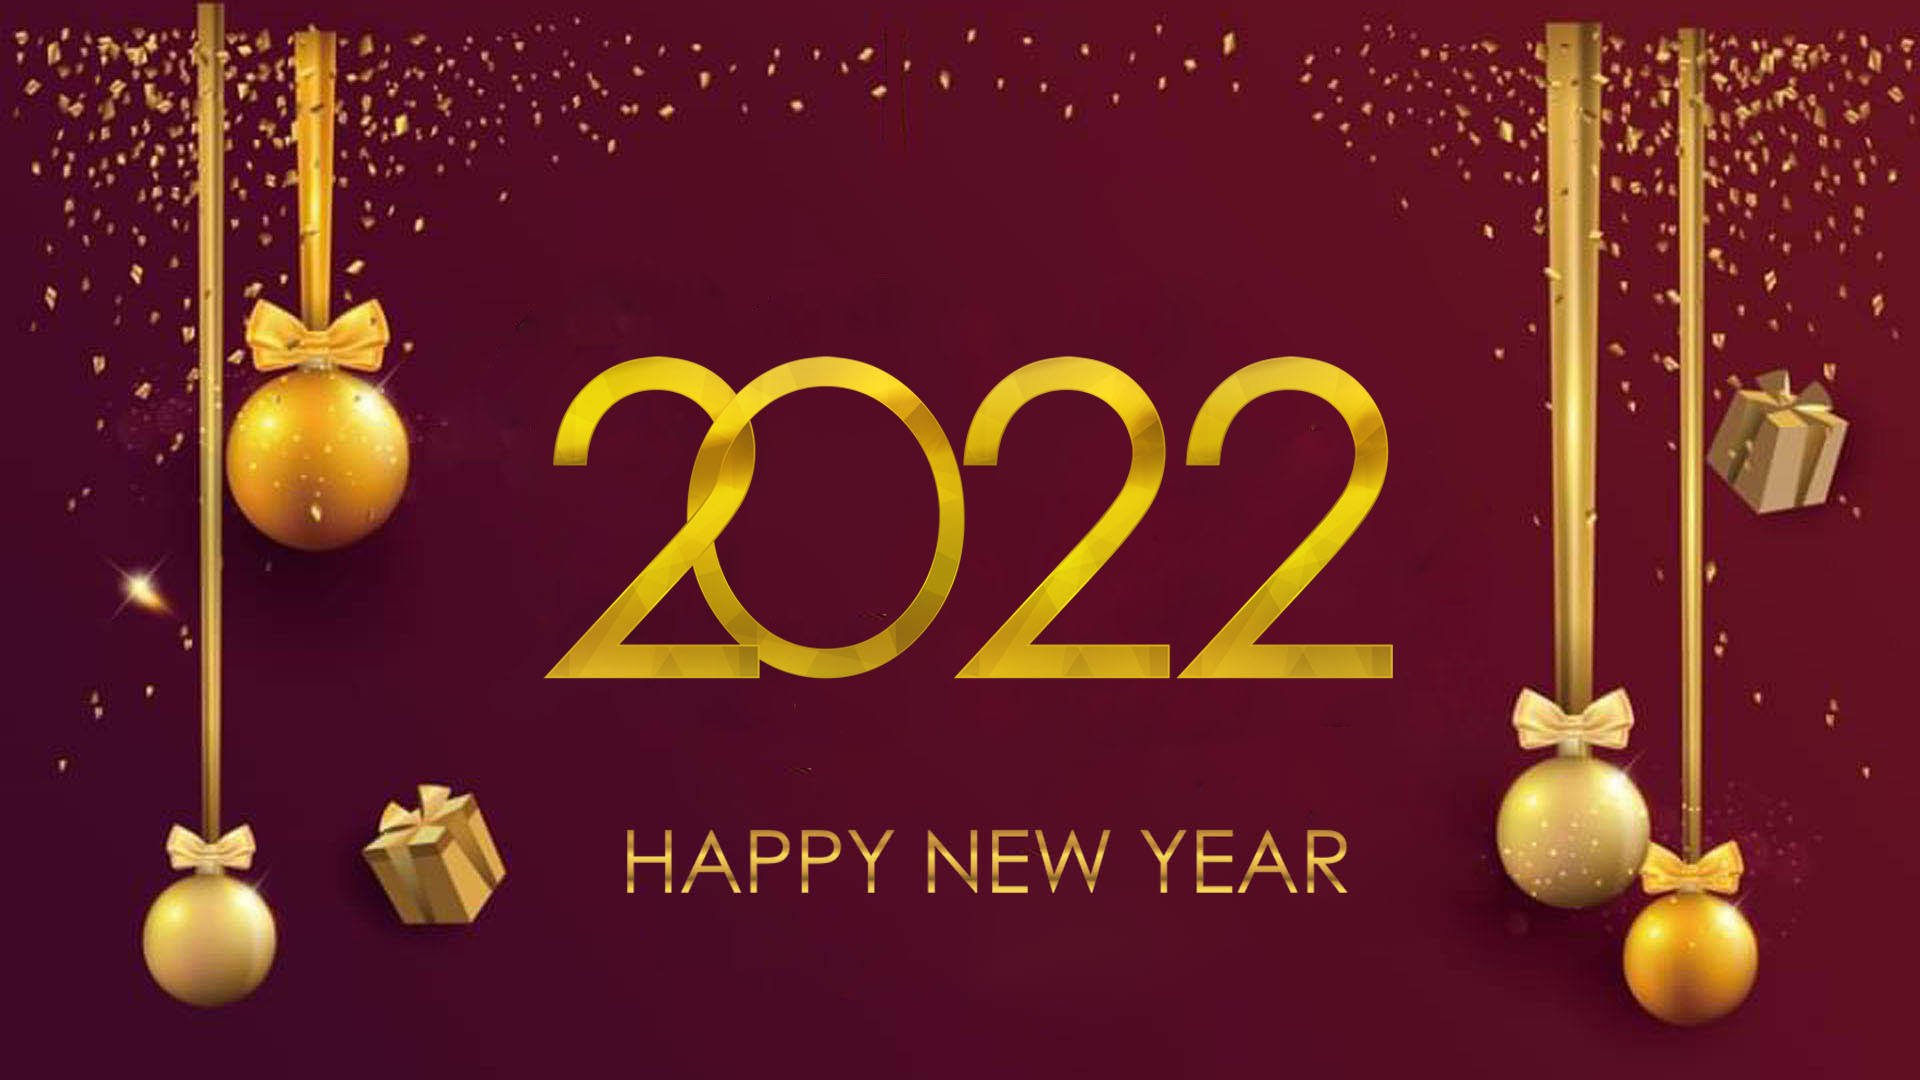 Happy New Year 2022 Shining Background With Gold Balls And Glitter Elegant  Design : 